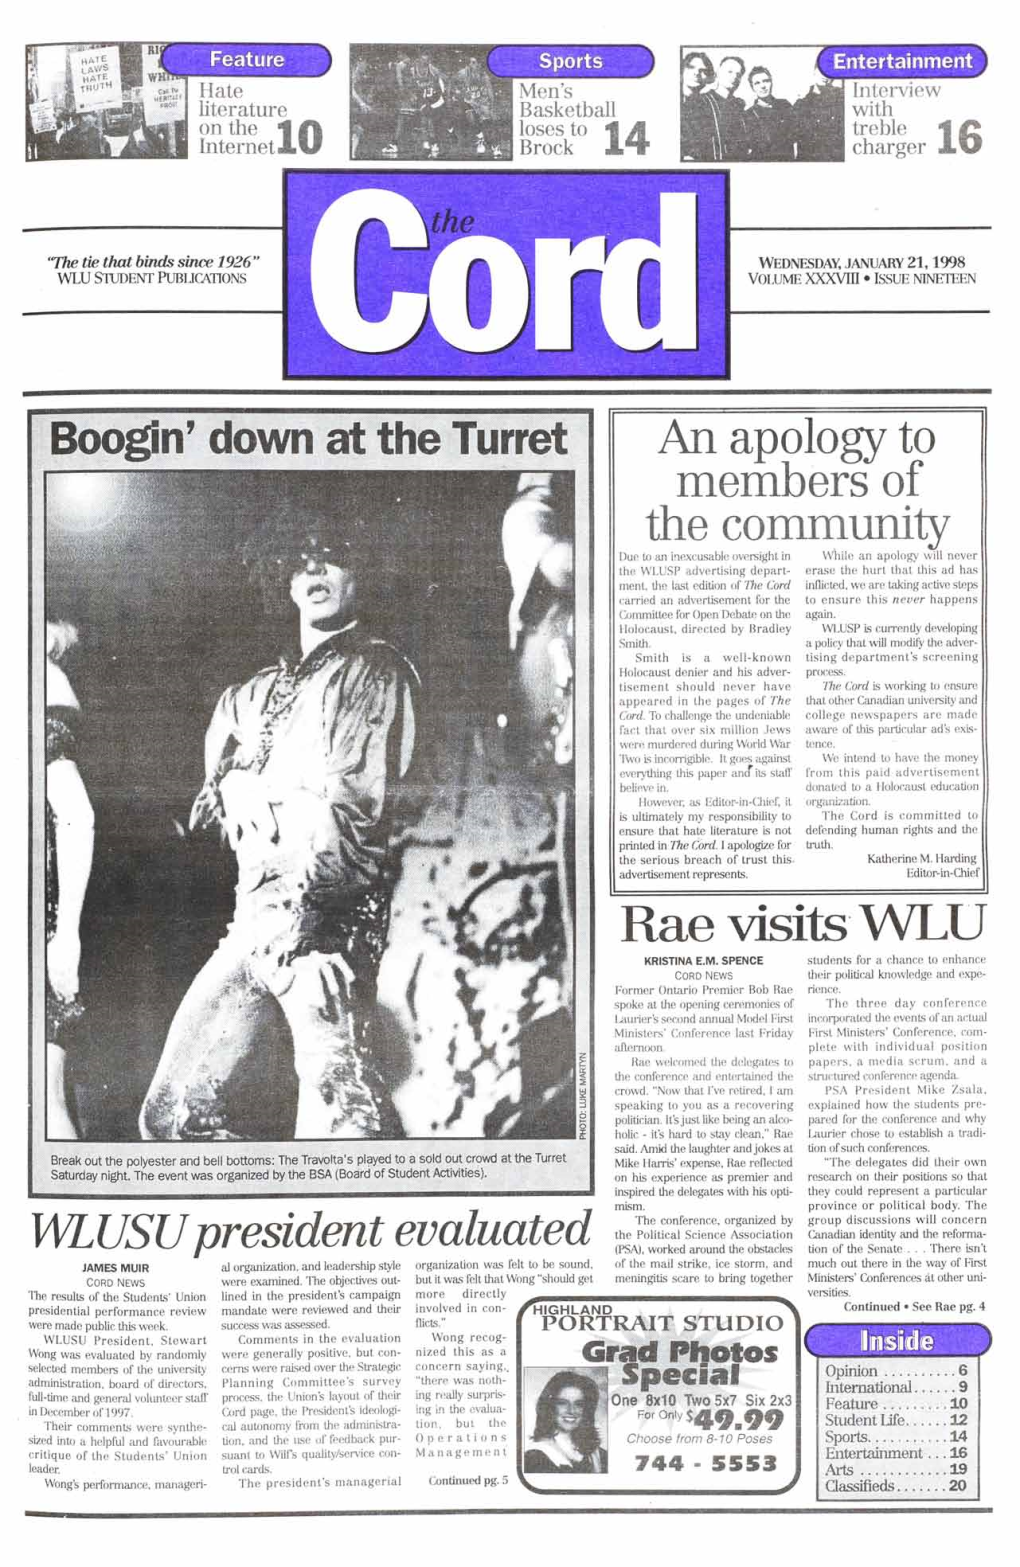 The Cord Weekly (January 21, 1998)